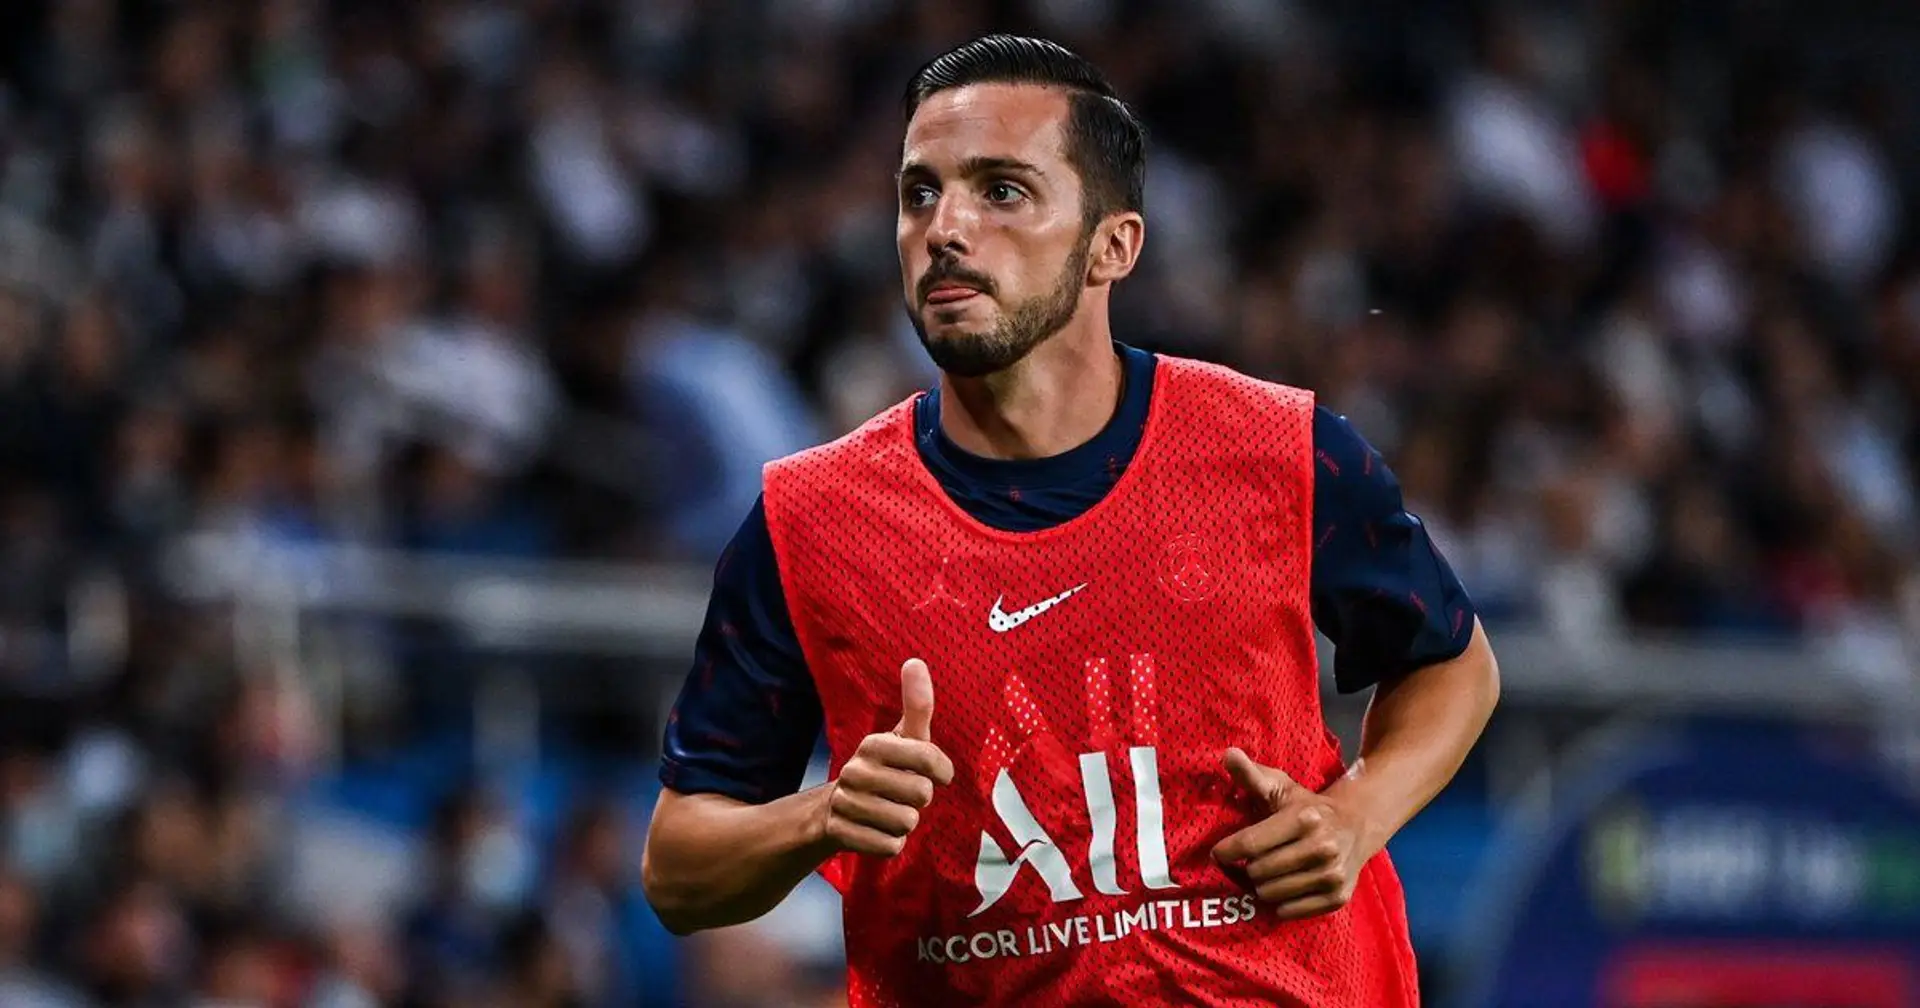 OFFICIAL: Sarabia joins Sporting CP on loan